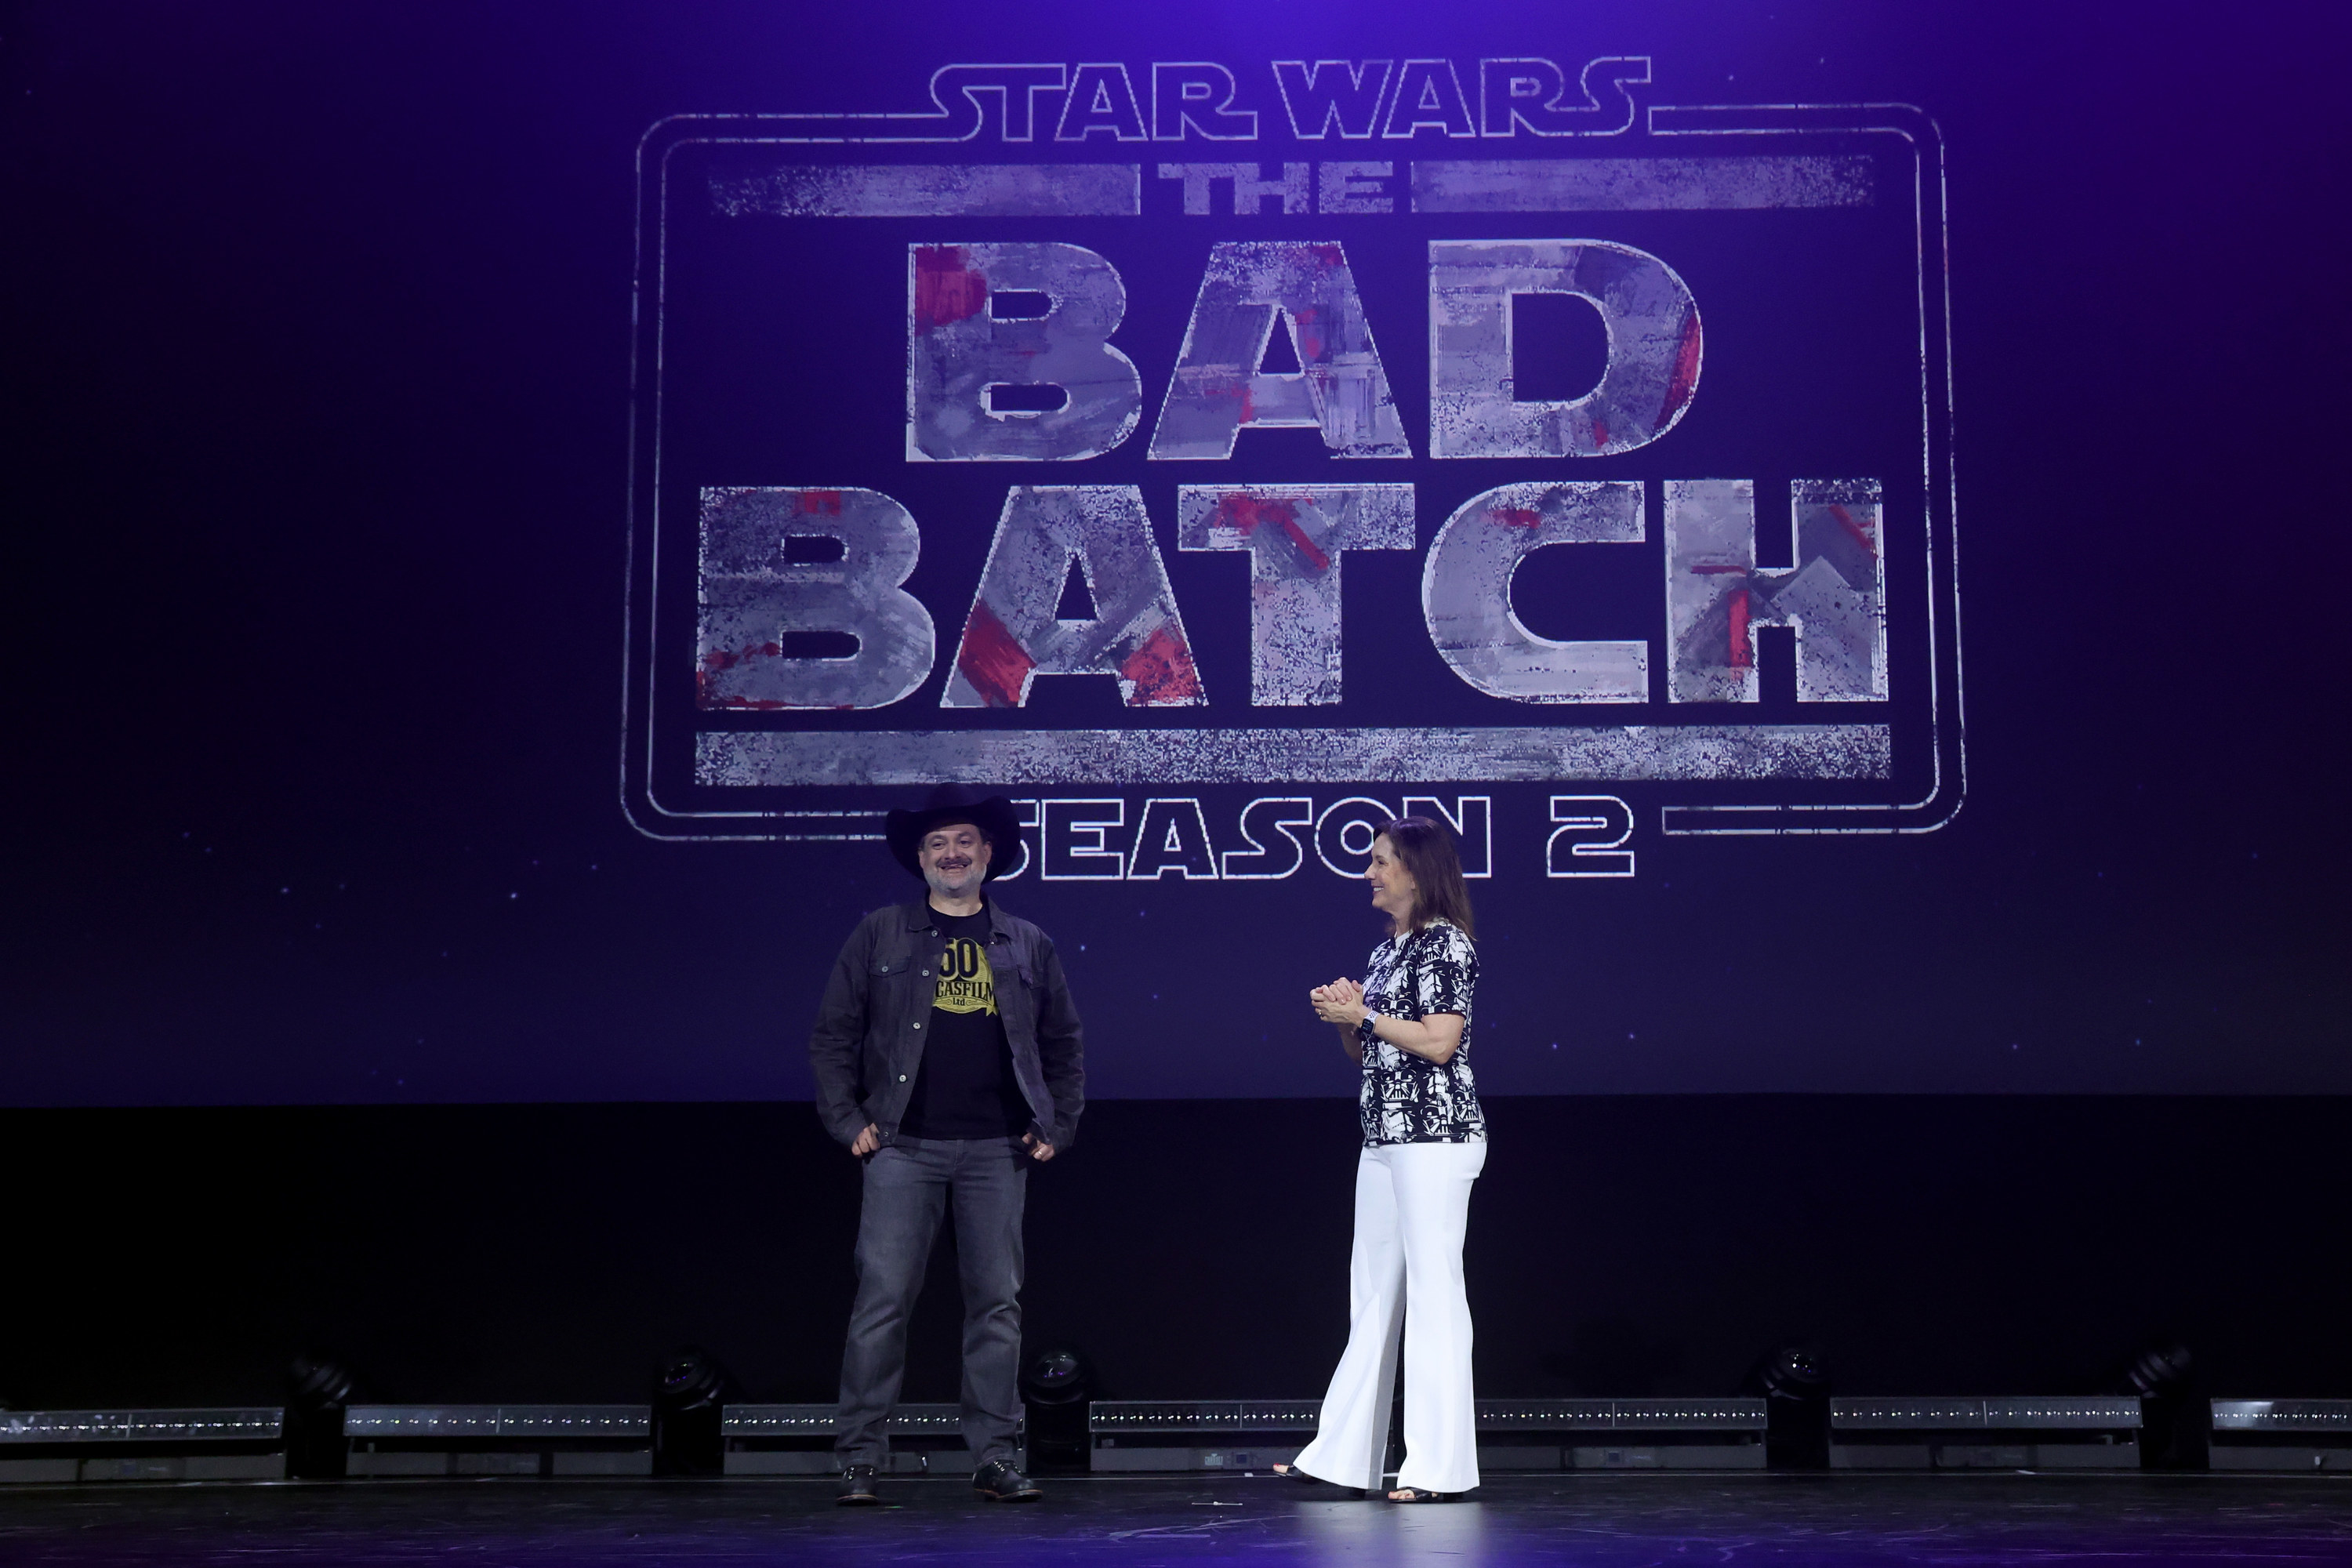 Dave Filoni and Kathleen Kennedy stand in front of a Bad Batch Season 2 logo